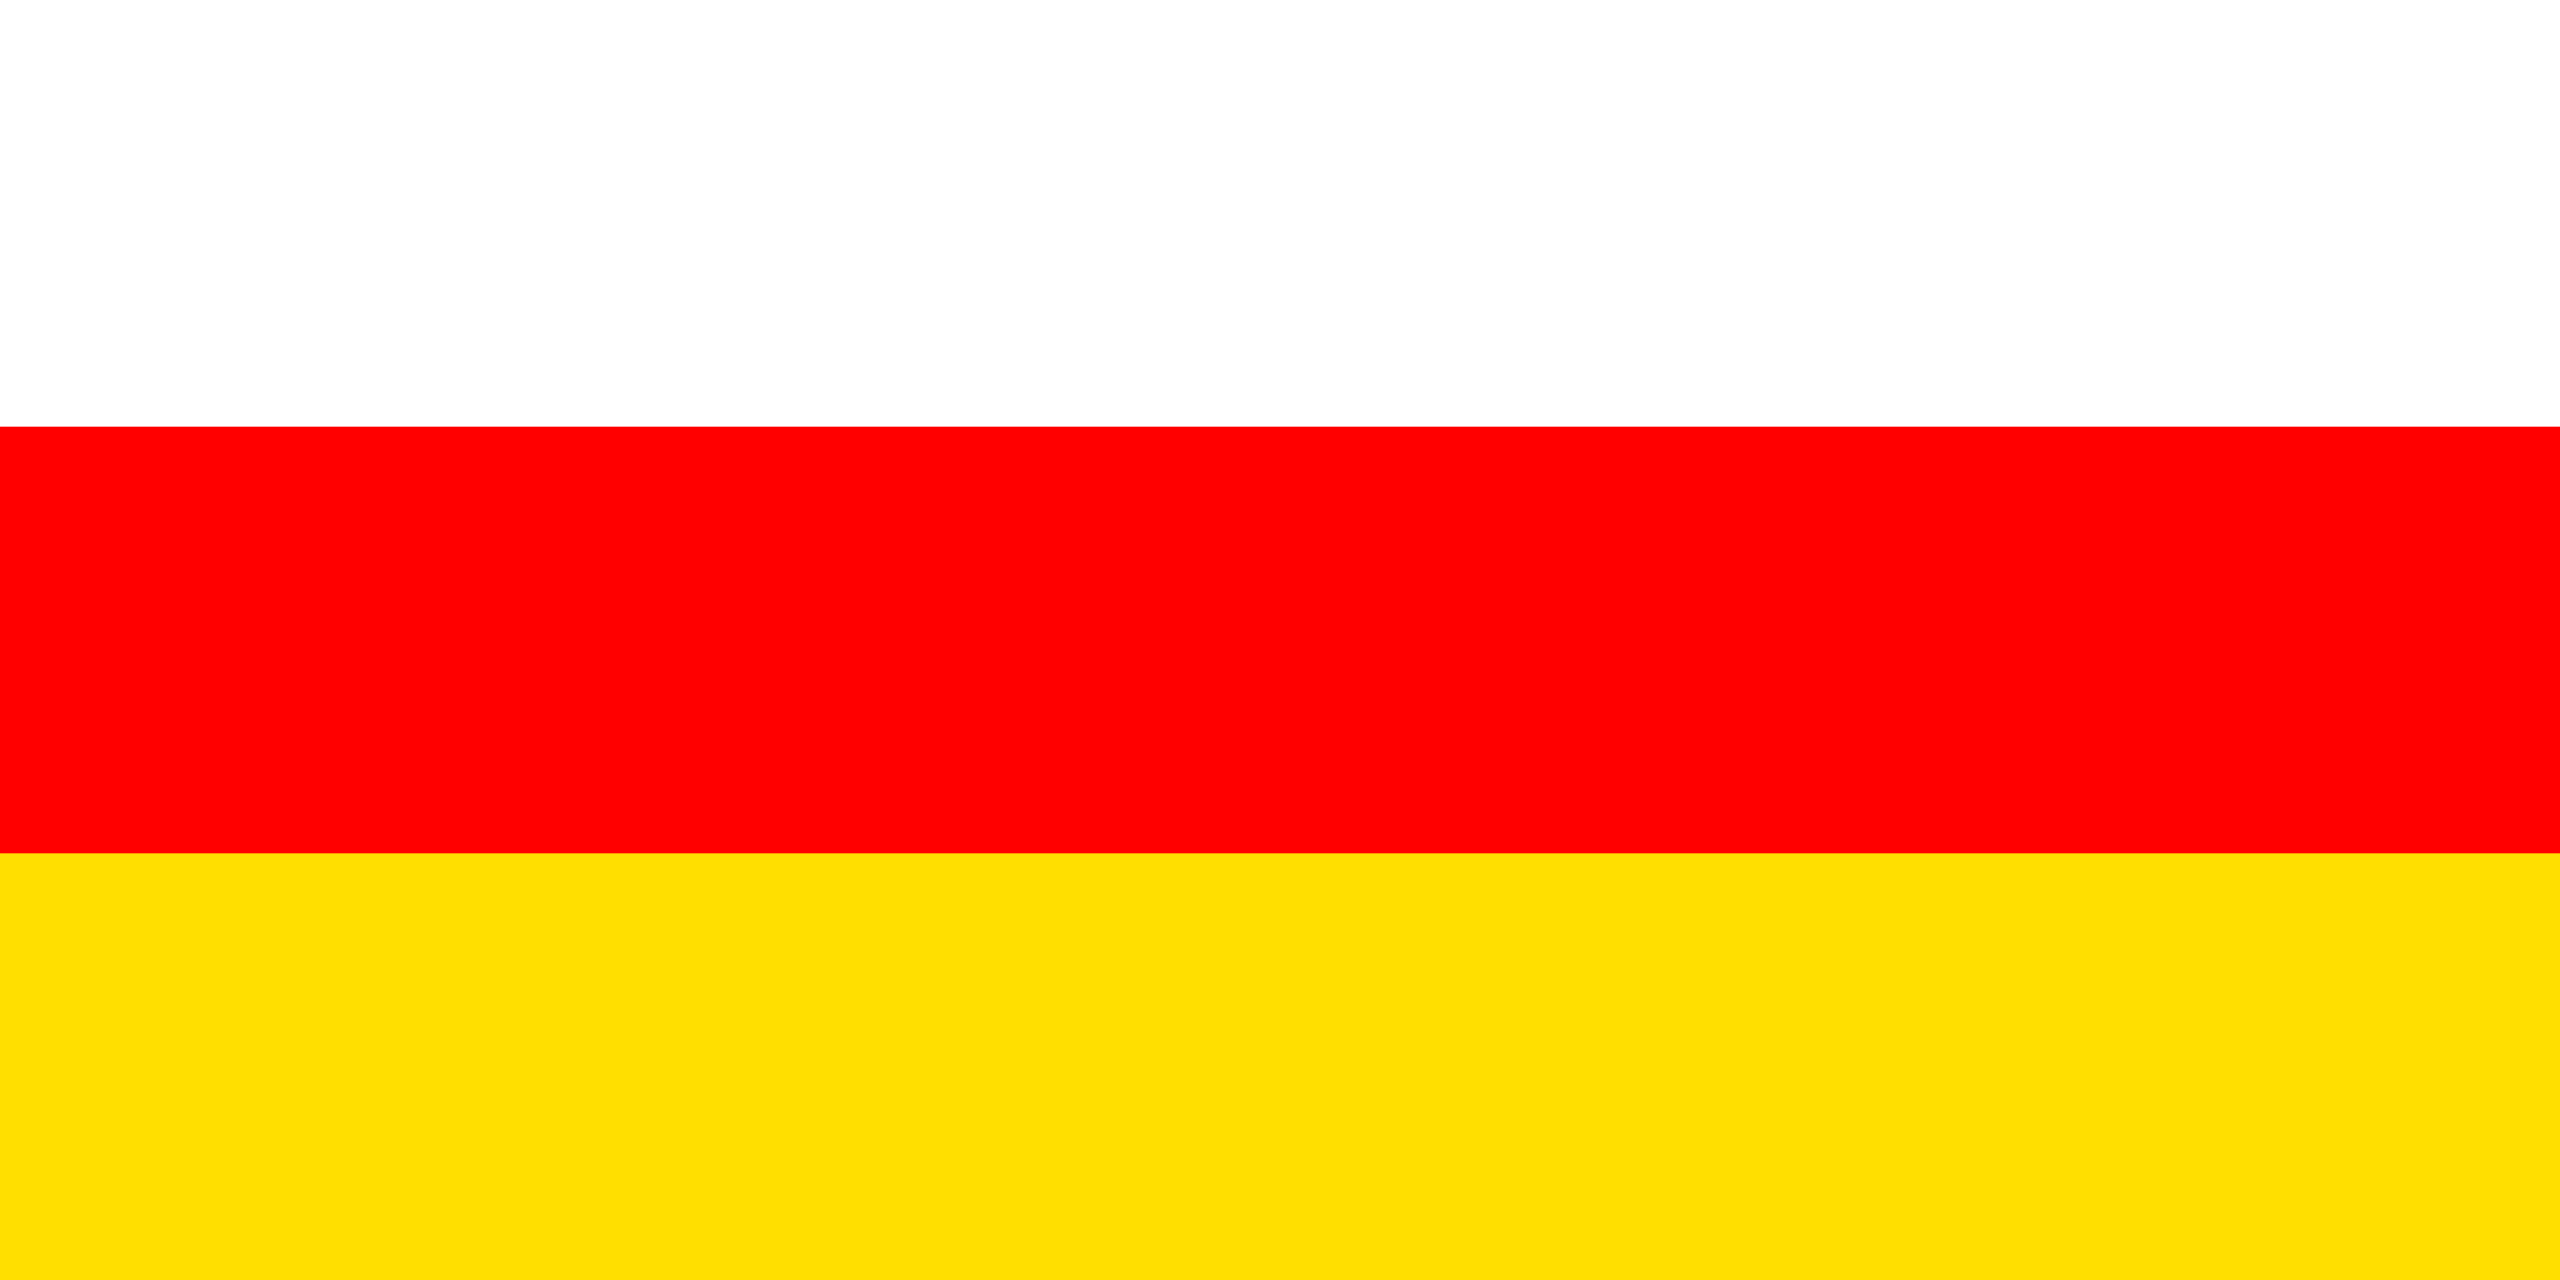 File:South Ossetian flag.png